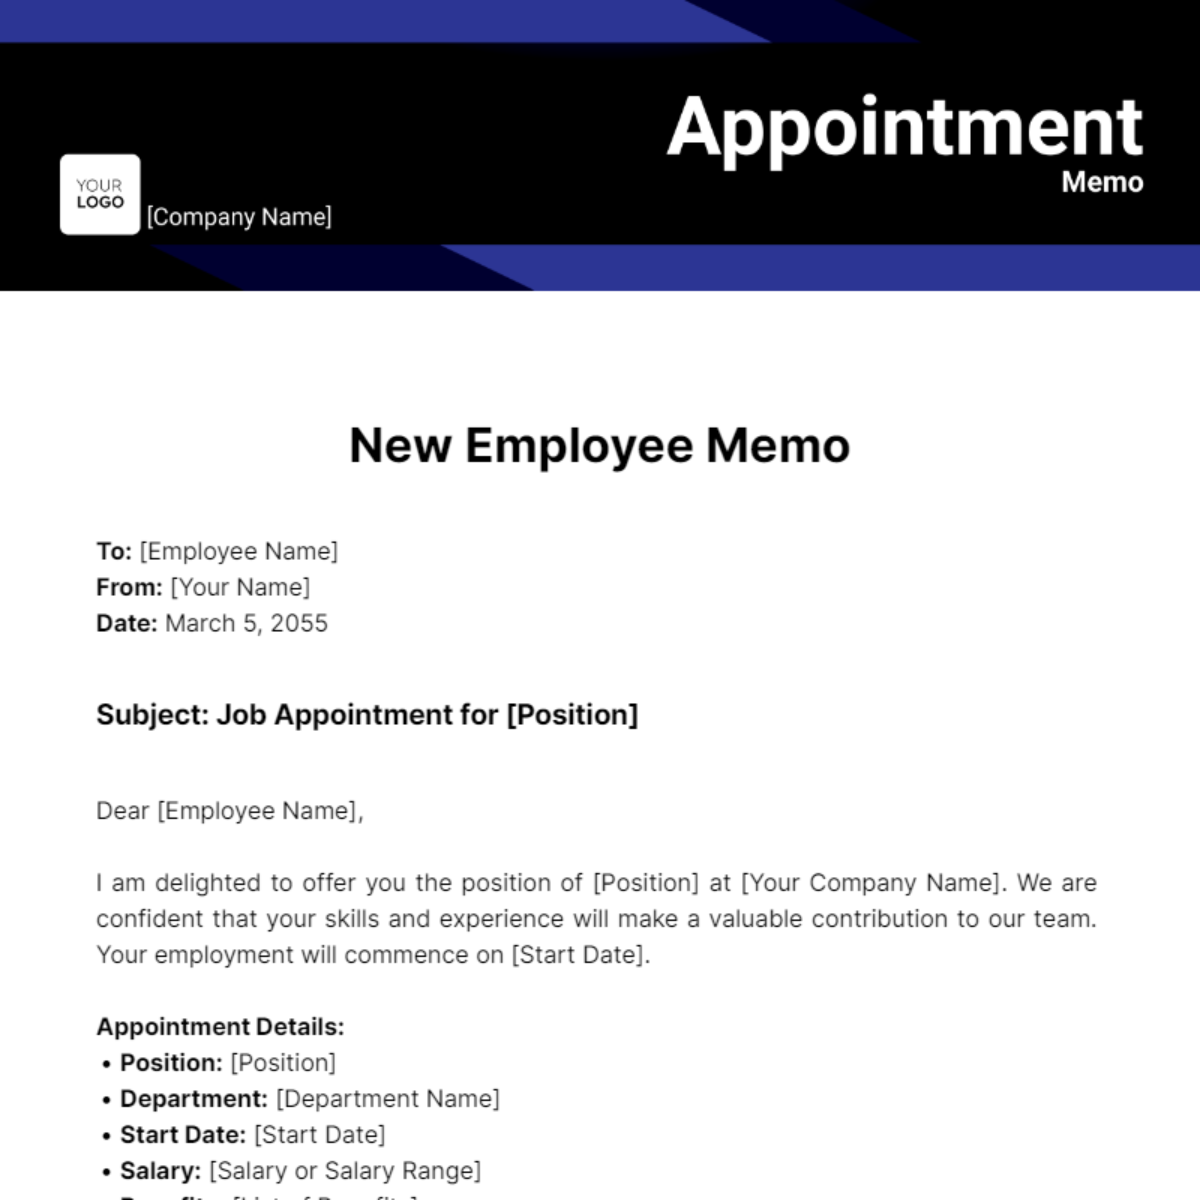 Appointment Memo Template